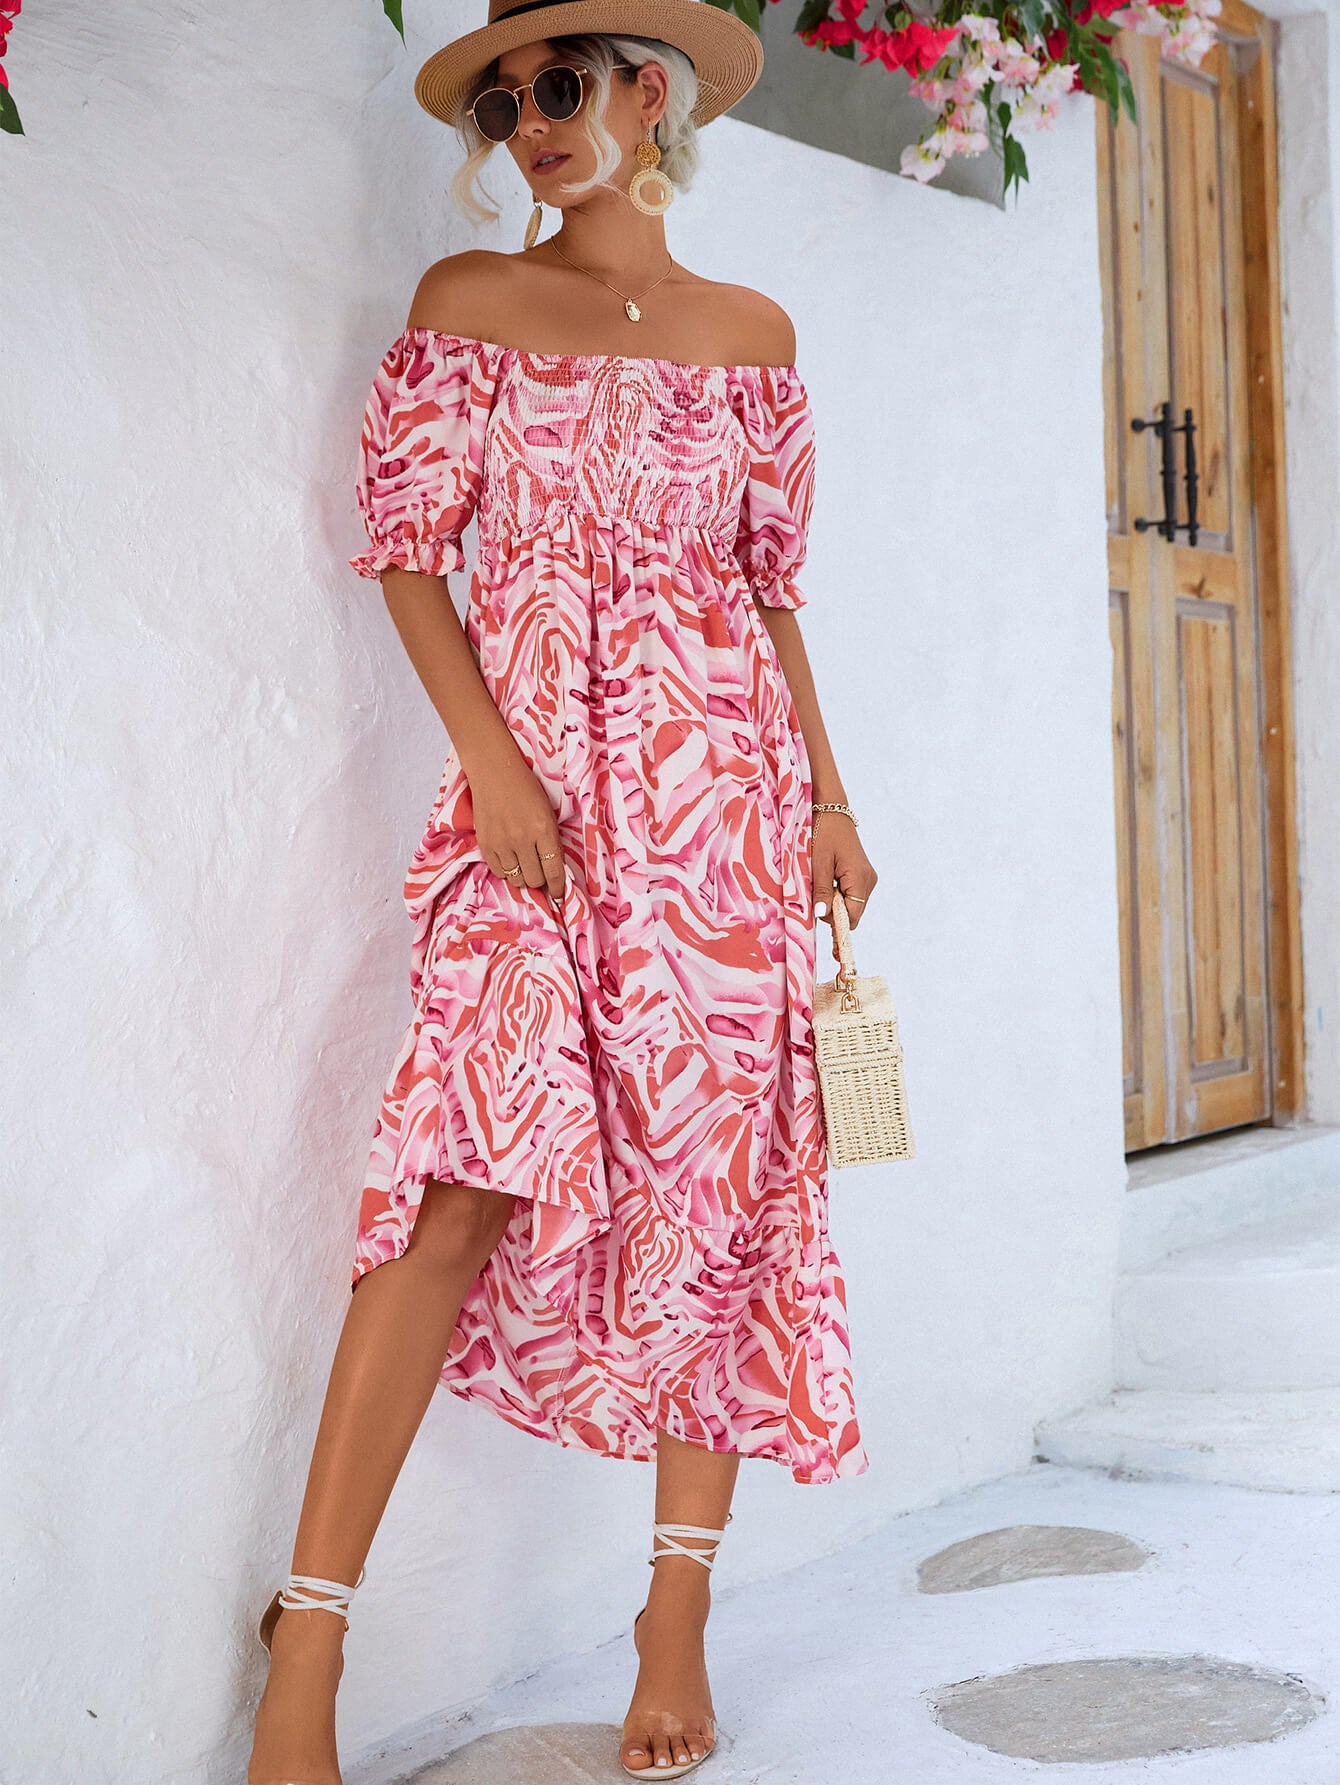 Chic Floral Midi Dress: Perfect for Summer Beach Weddings and Women Attendee Parties